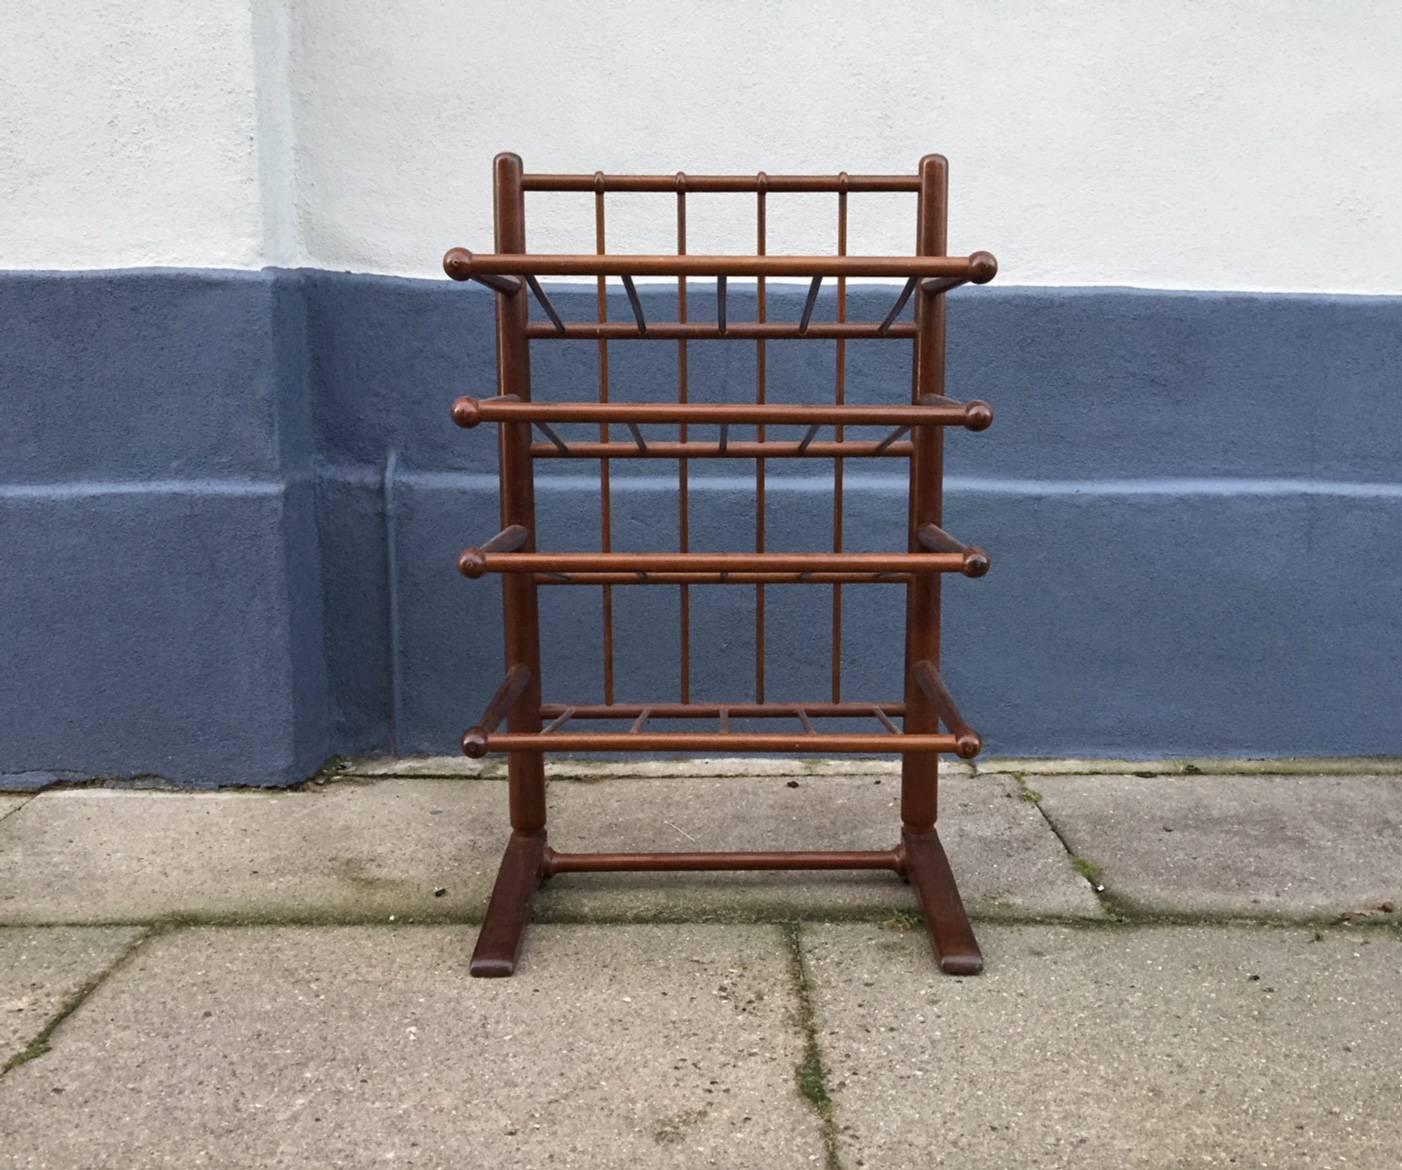 Magazine or shoe rack designed by Frits Henningsen and manufactured by Andreas Tuck in Denmark during the 1940s. The solid mahogany frame features Drumstick detailing and bend/shaped wood detailing.